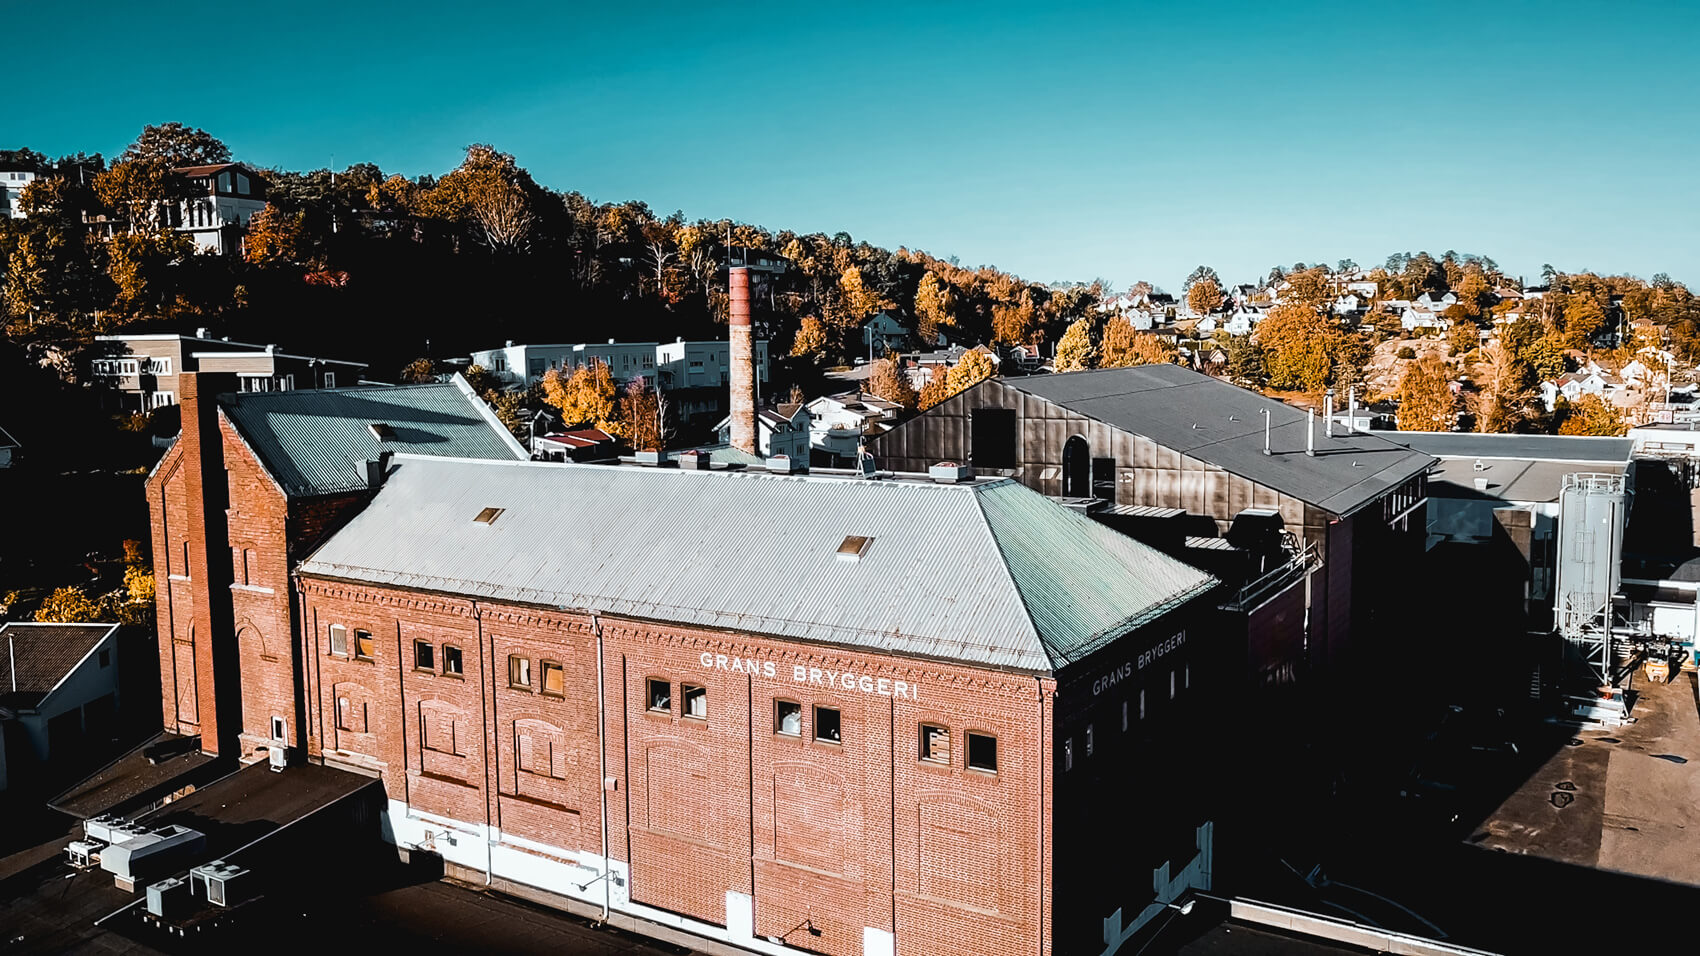 Grans Bryggeri AS, Norway: Complete hot block plus continuous automation